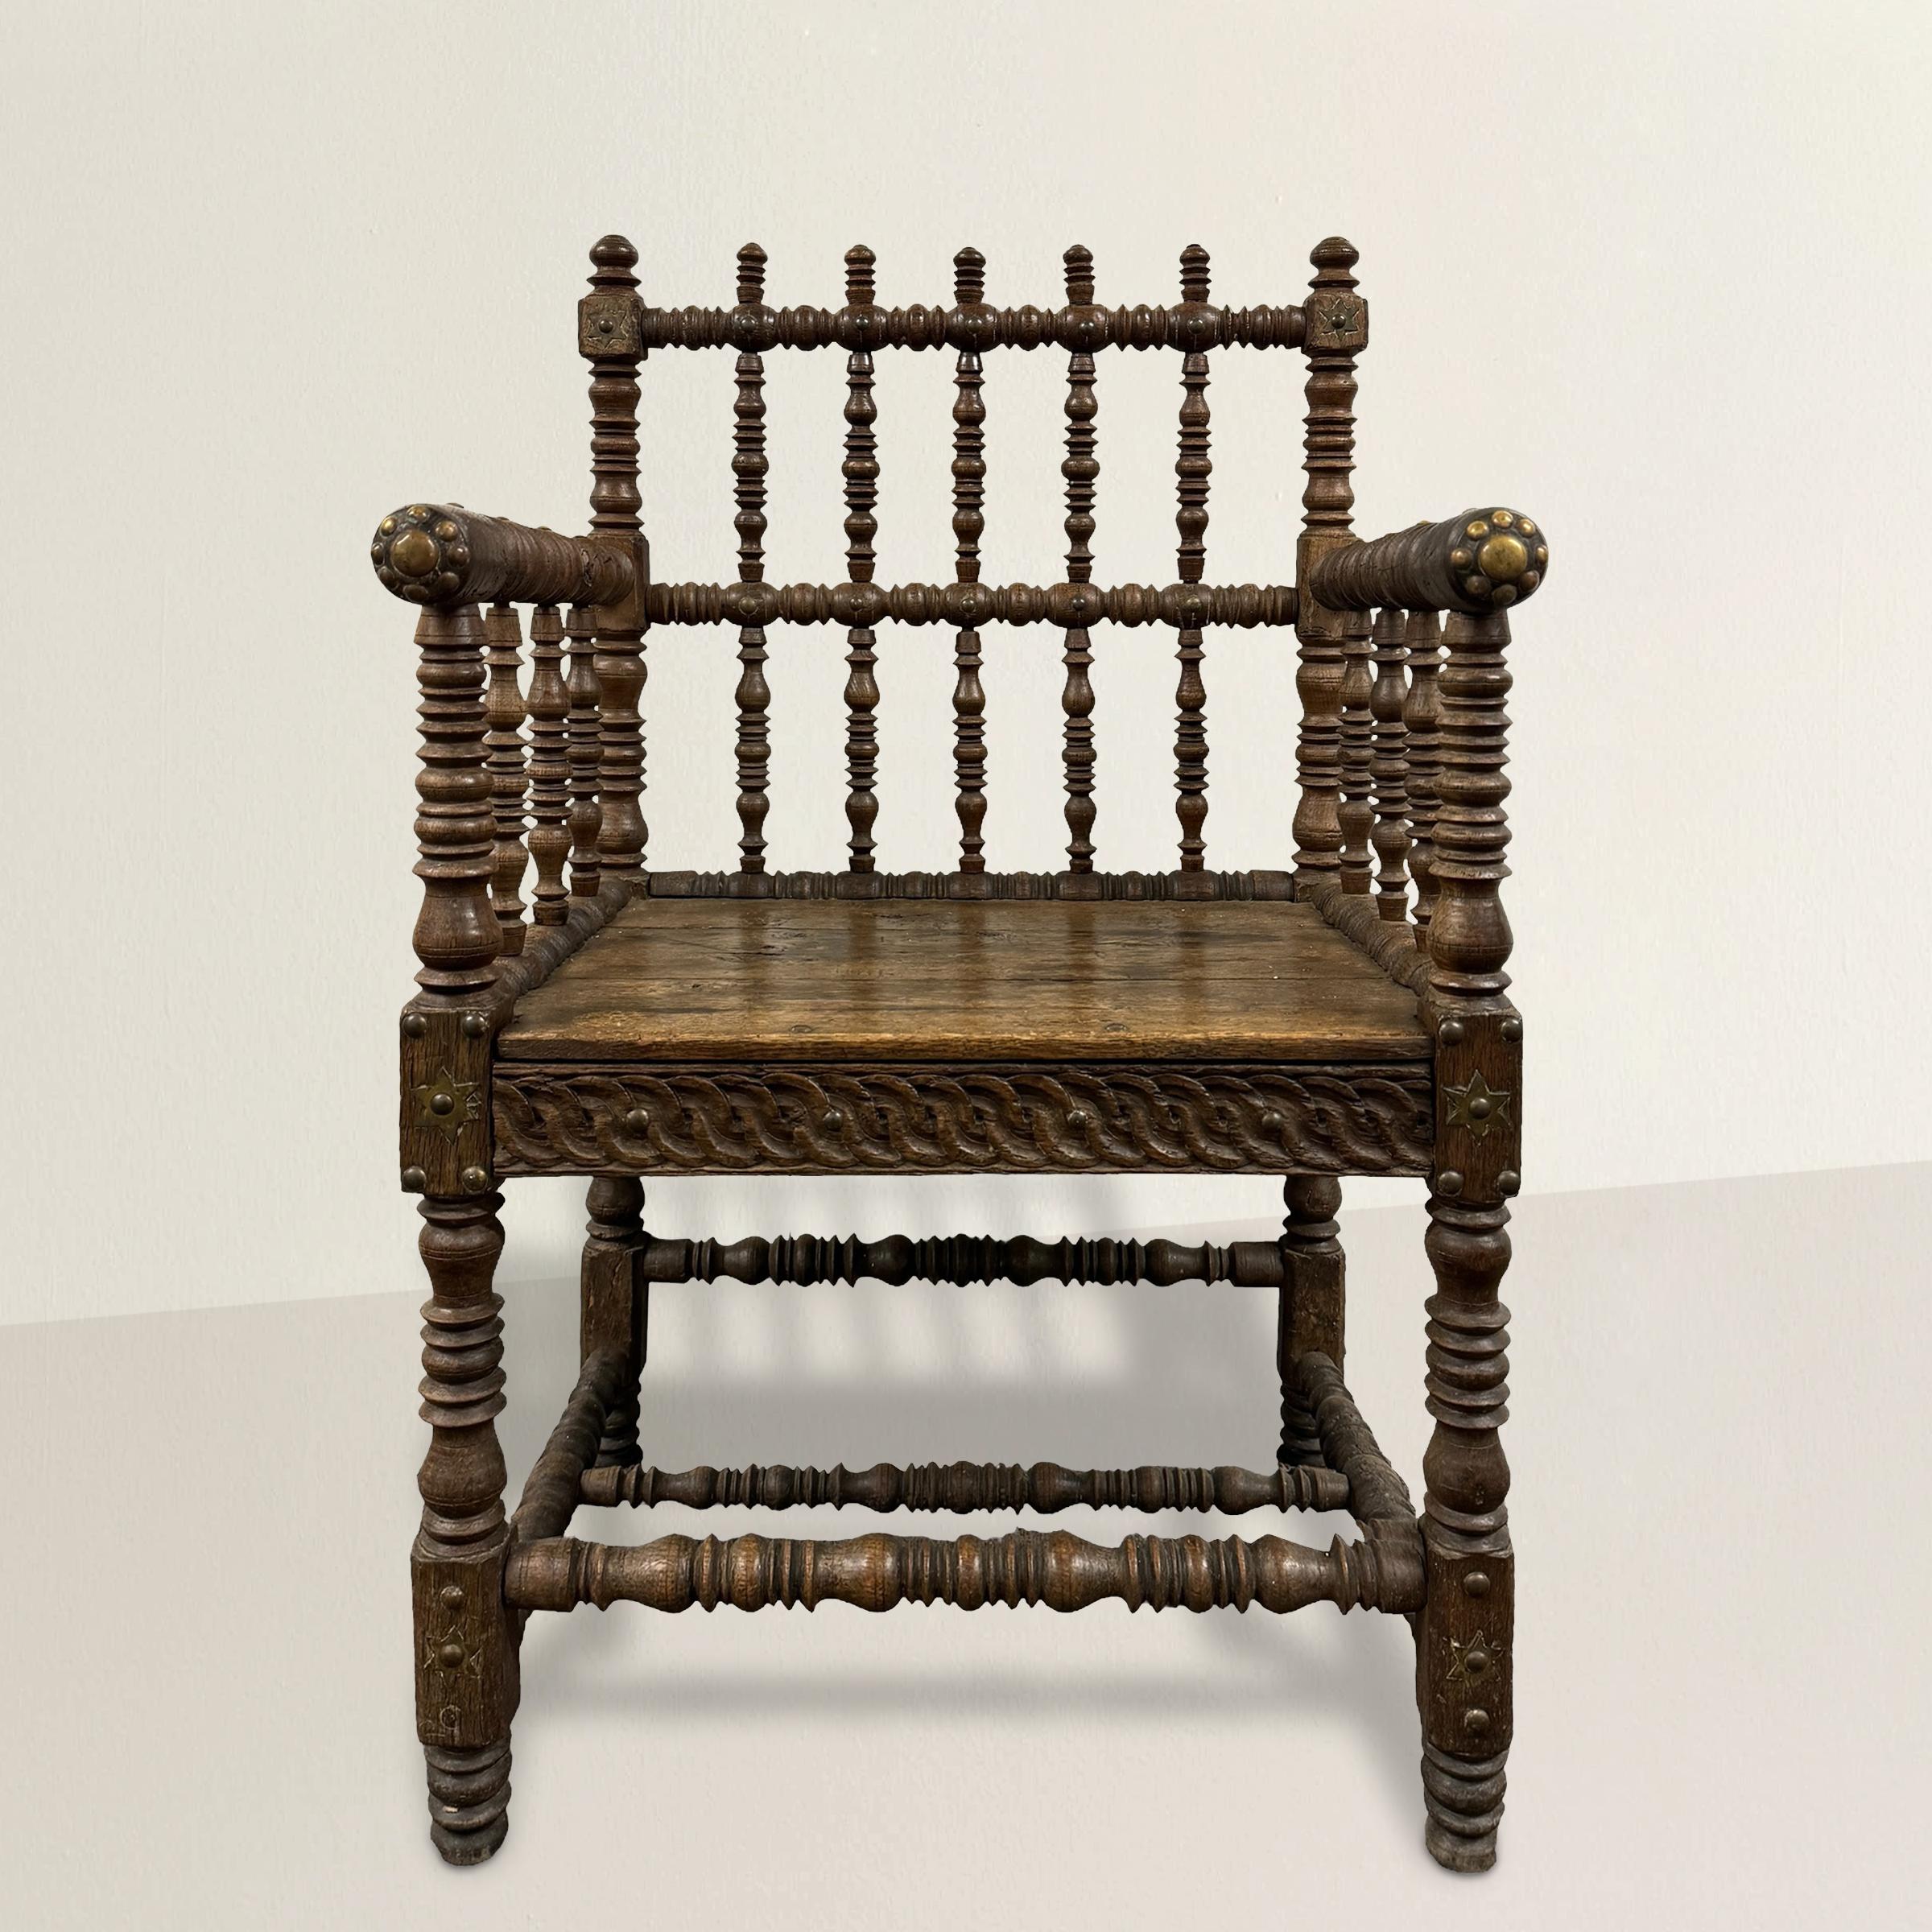 This 18th-century French Turner's chair is a masterful example of Baroque craftsmanship and elegance. Turner's chairs were created by skilled professional wood turners to showcase their exceptional skill level to prospective customers. Originating